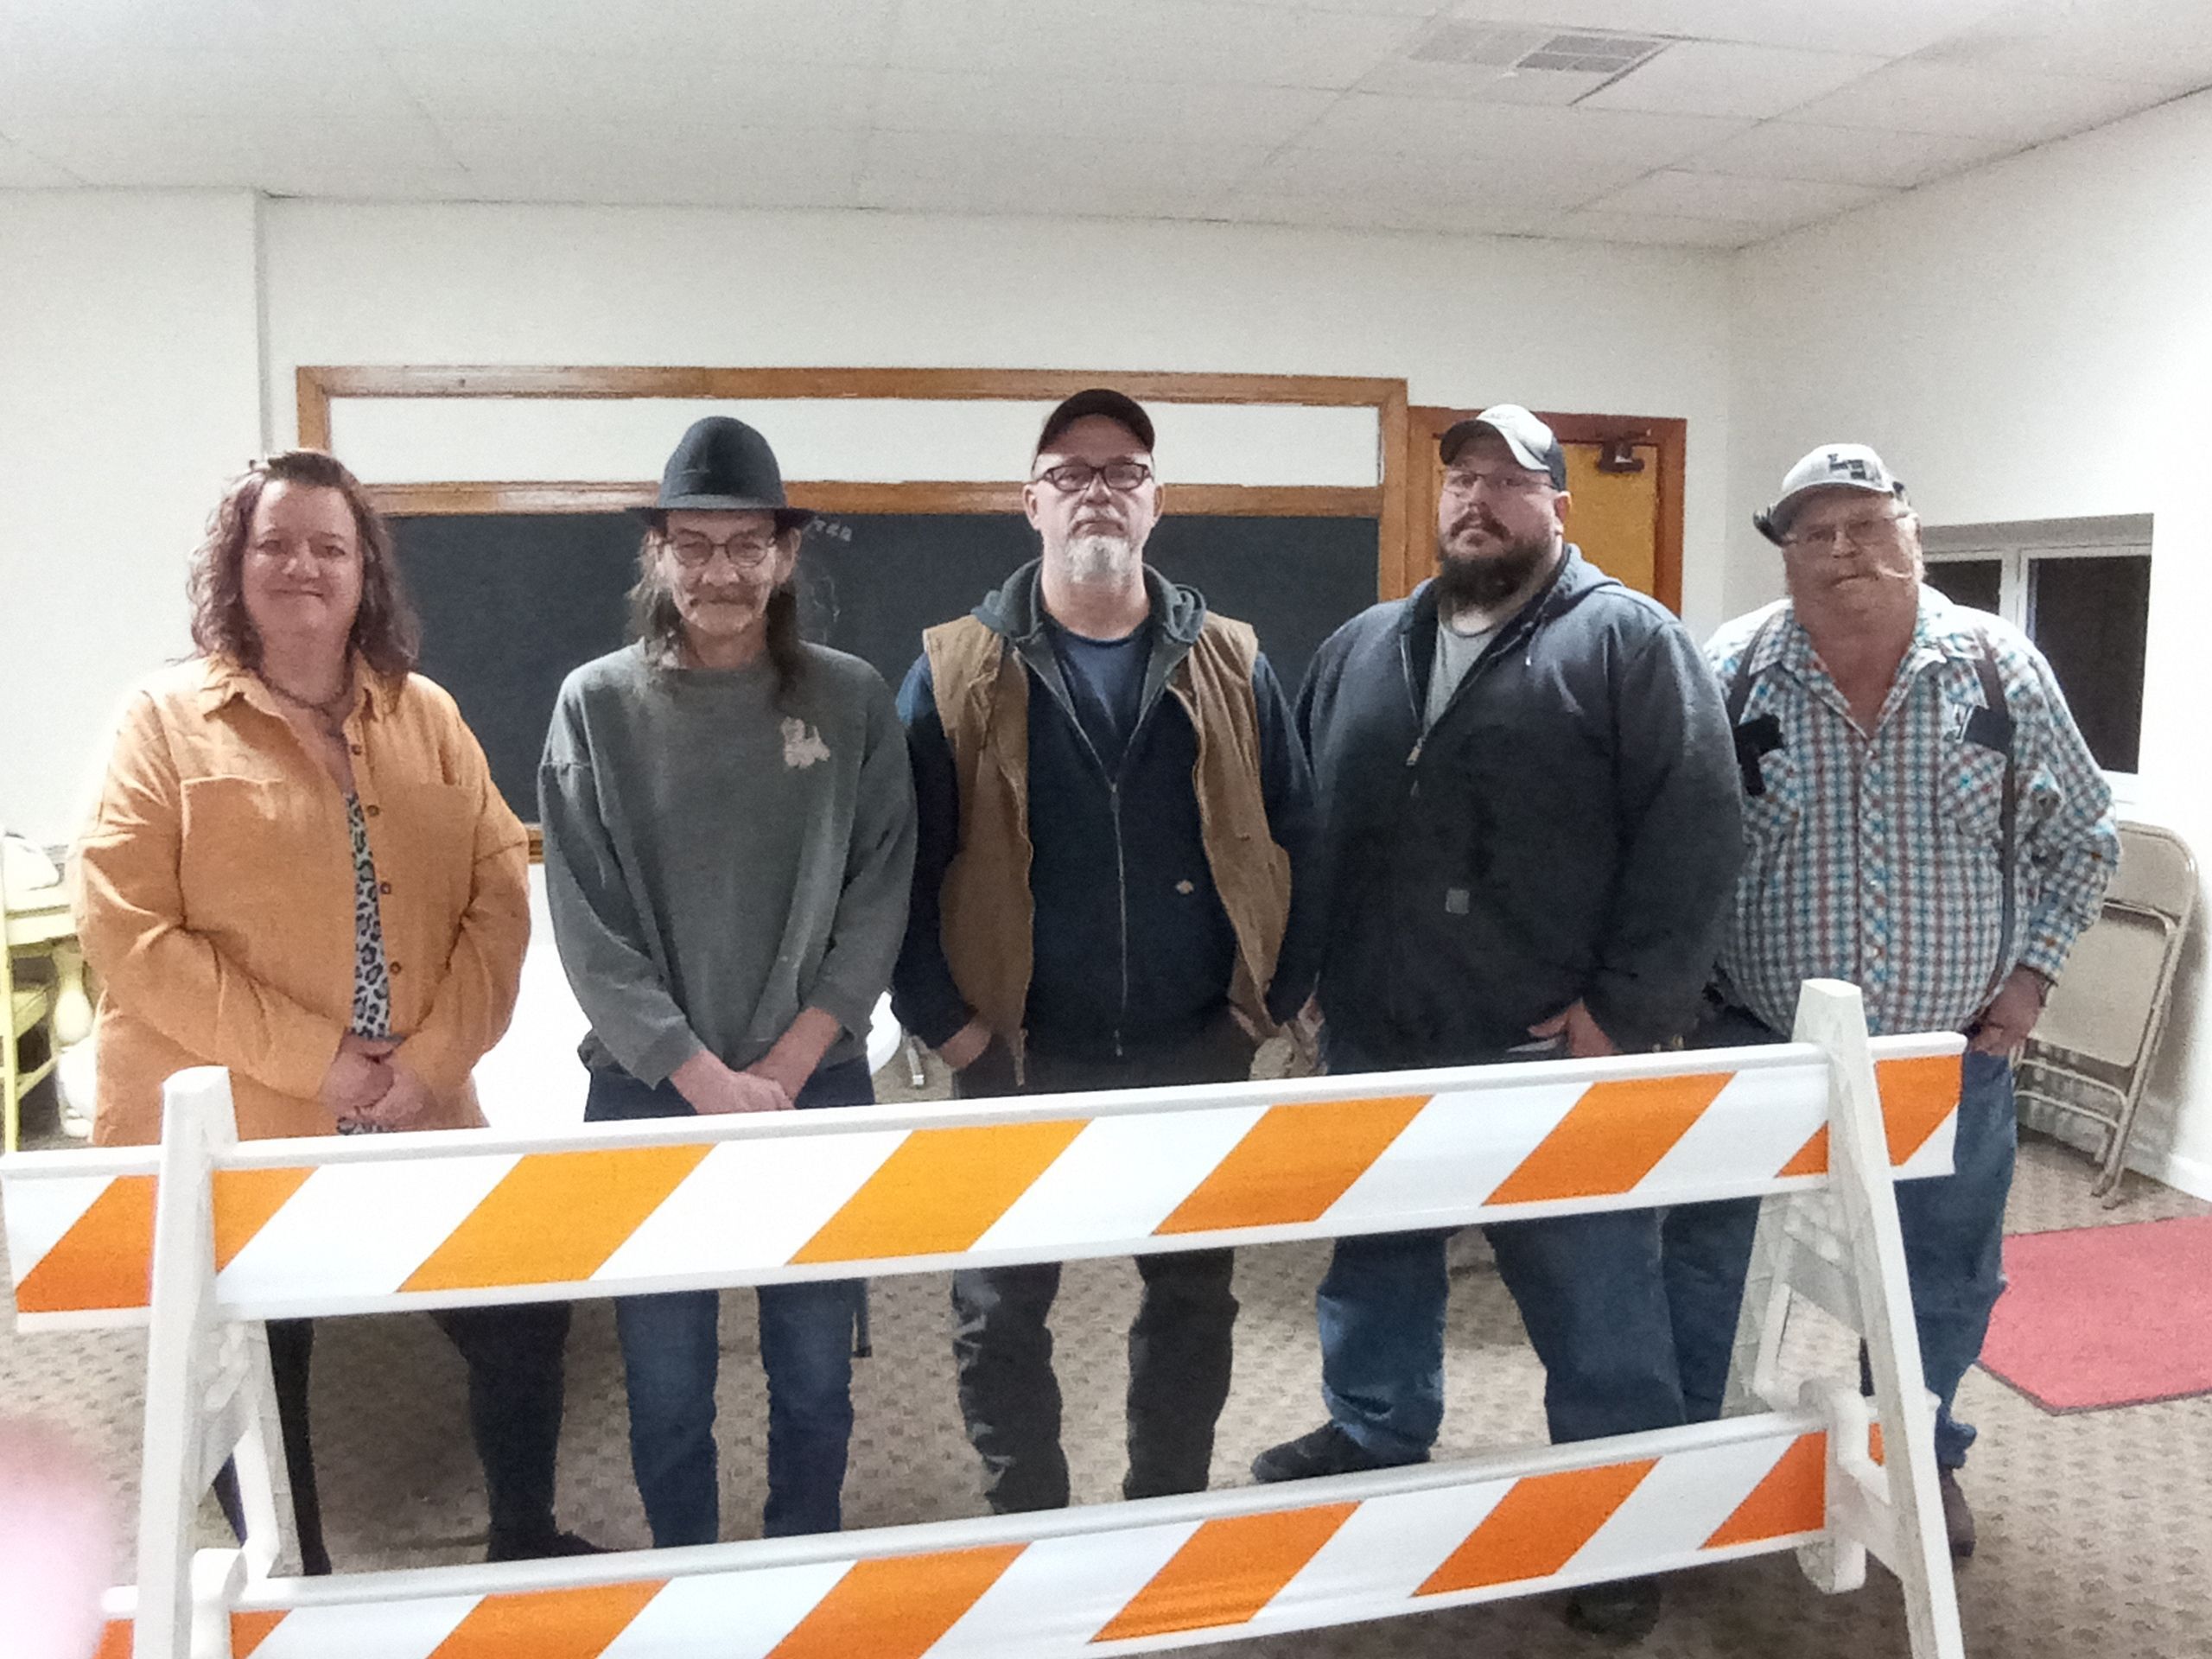 Village of Broadwater purchases safety barricades with grant